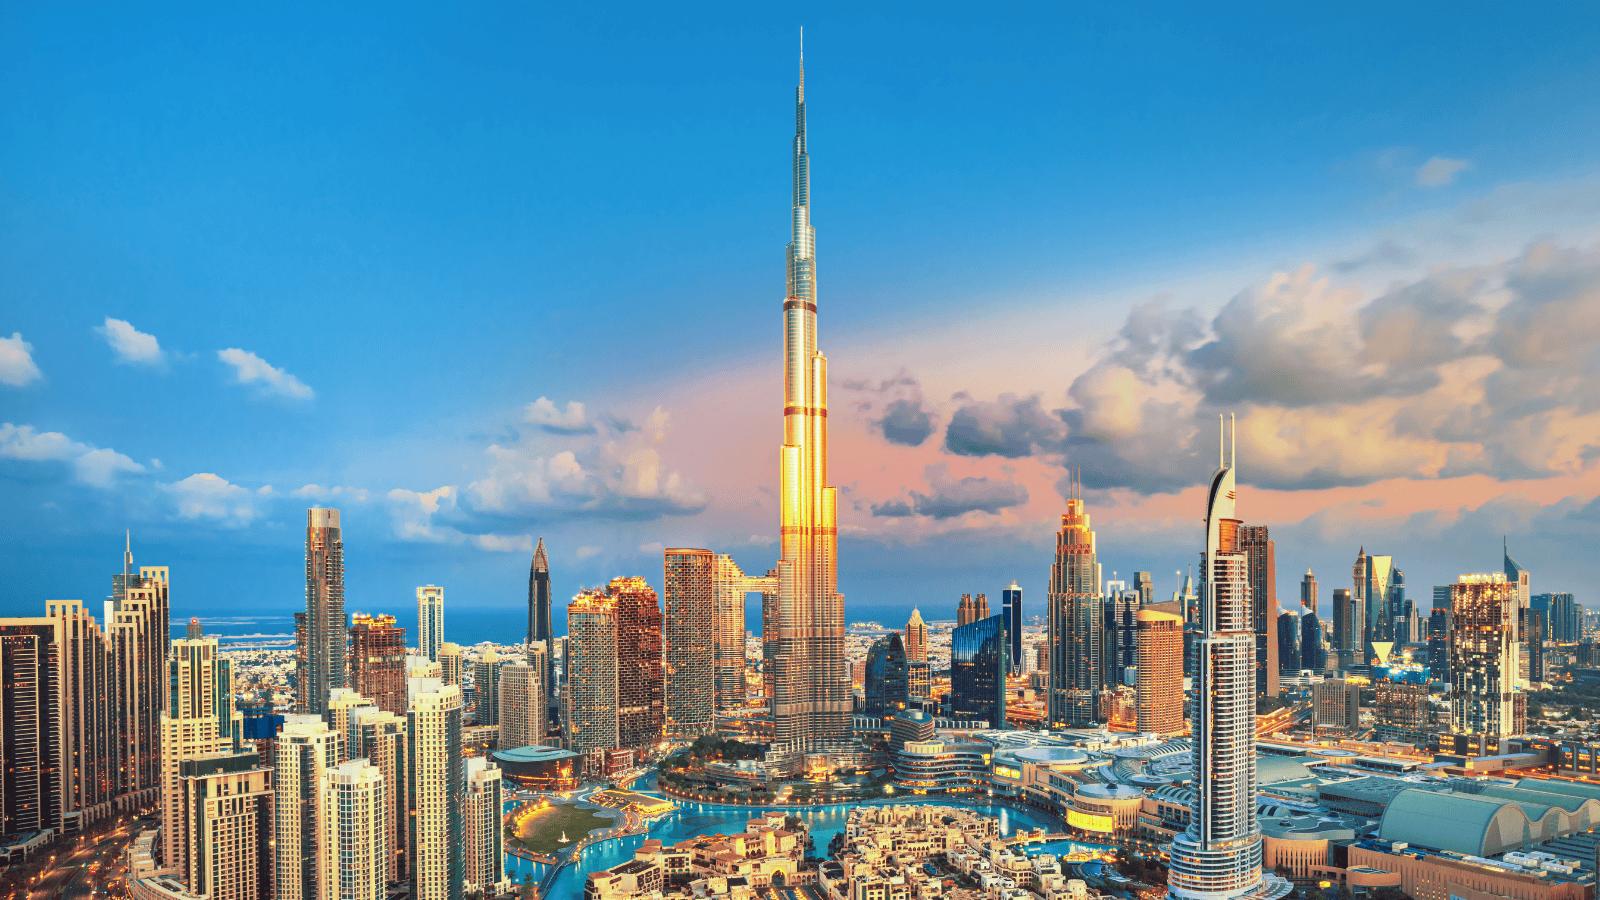 <p>Avoid falling into the gimmicky tourist trap of Dubai by visiting these underrated alternatives instead.</p> <p>While travel influencers have hyped Dubai in the United Arab Emirates as a must-visit spot, many find it overpriced and not worth the trip. Critics say it’s a flashy destination that’s being overrun by highly manufactured Instagram spots and touristy activities. Other cities worldwide offer the same modern infrastructure but with a more exciting, authentic culture and affordable prices.</p> <p><strong>These Dubai alternatives offer everything the city has and more:</strong></p>